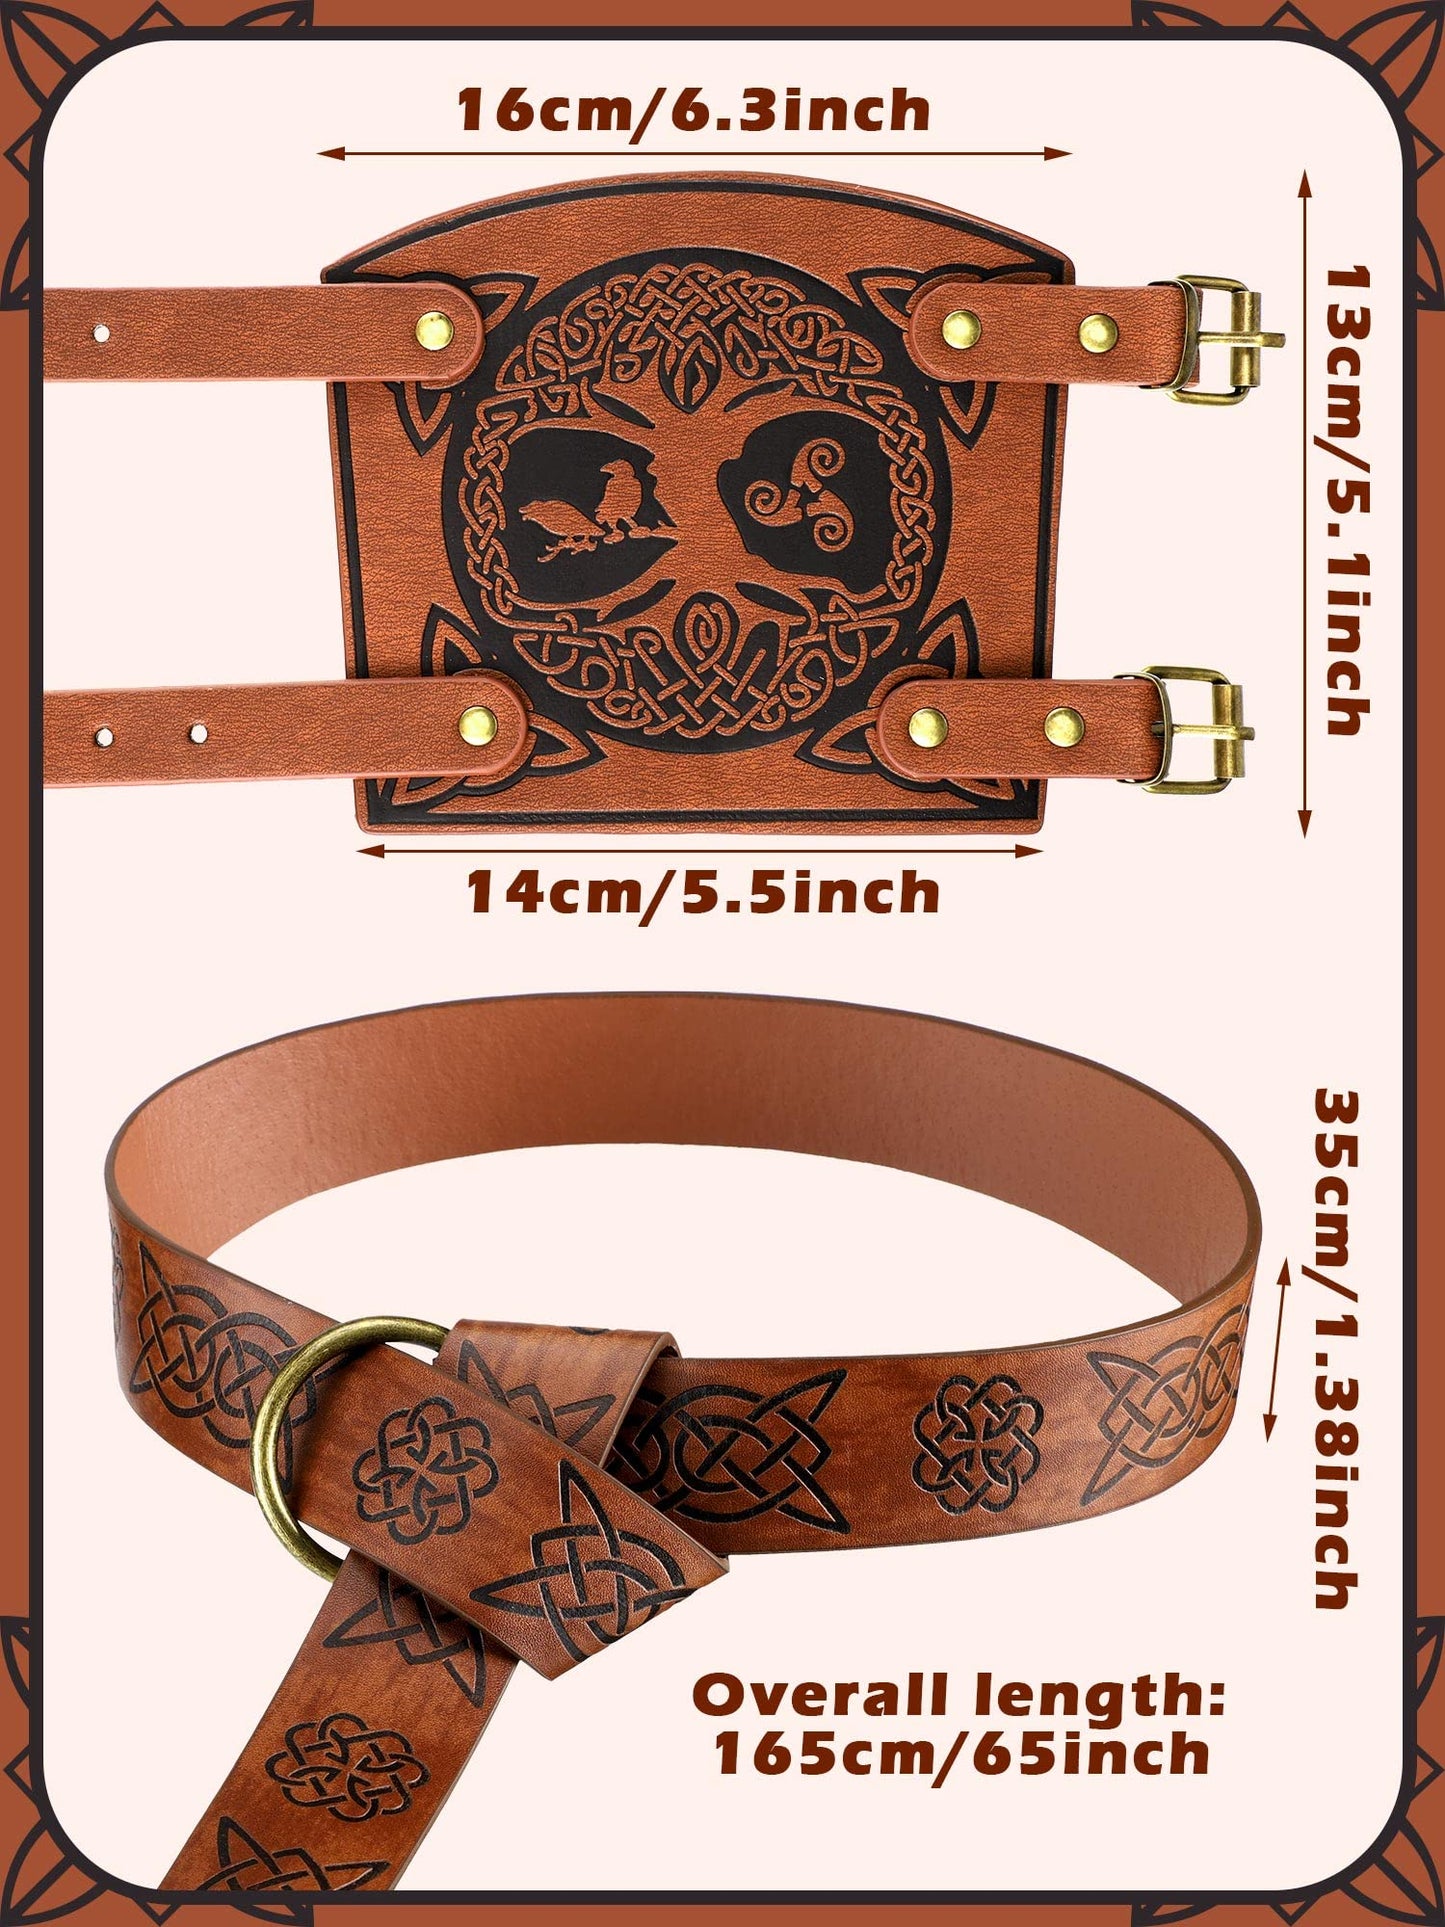 Newcotte 3 pcs Renaissance Viking Retro Knight Belt Embossed O Ring Belt Pu Leather Buckle Arm Guards for Halloween Costume Vintage Style Brown